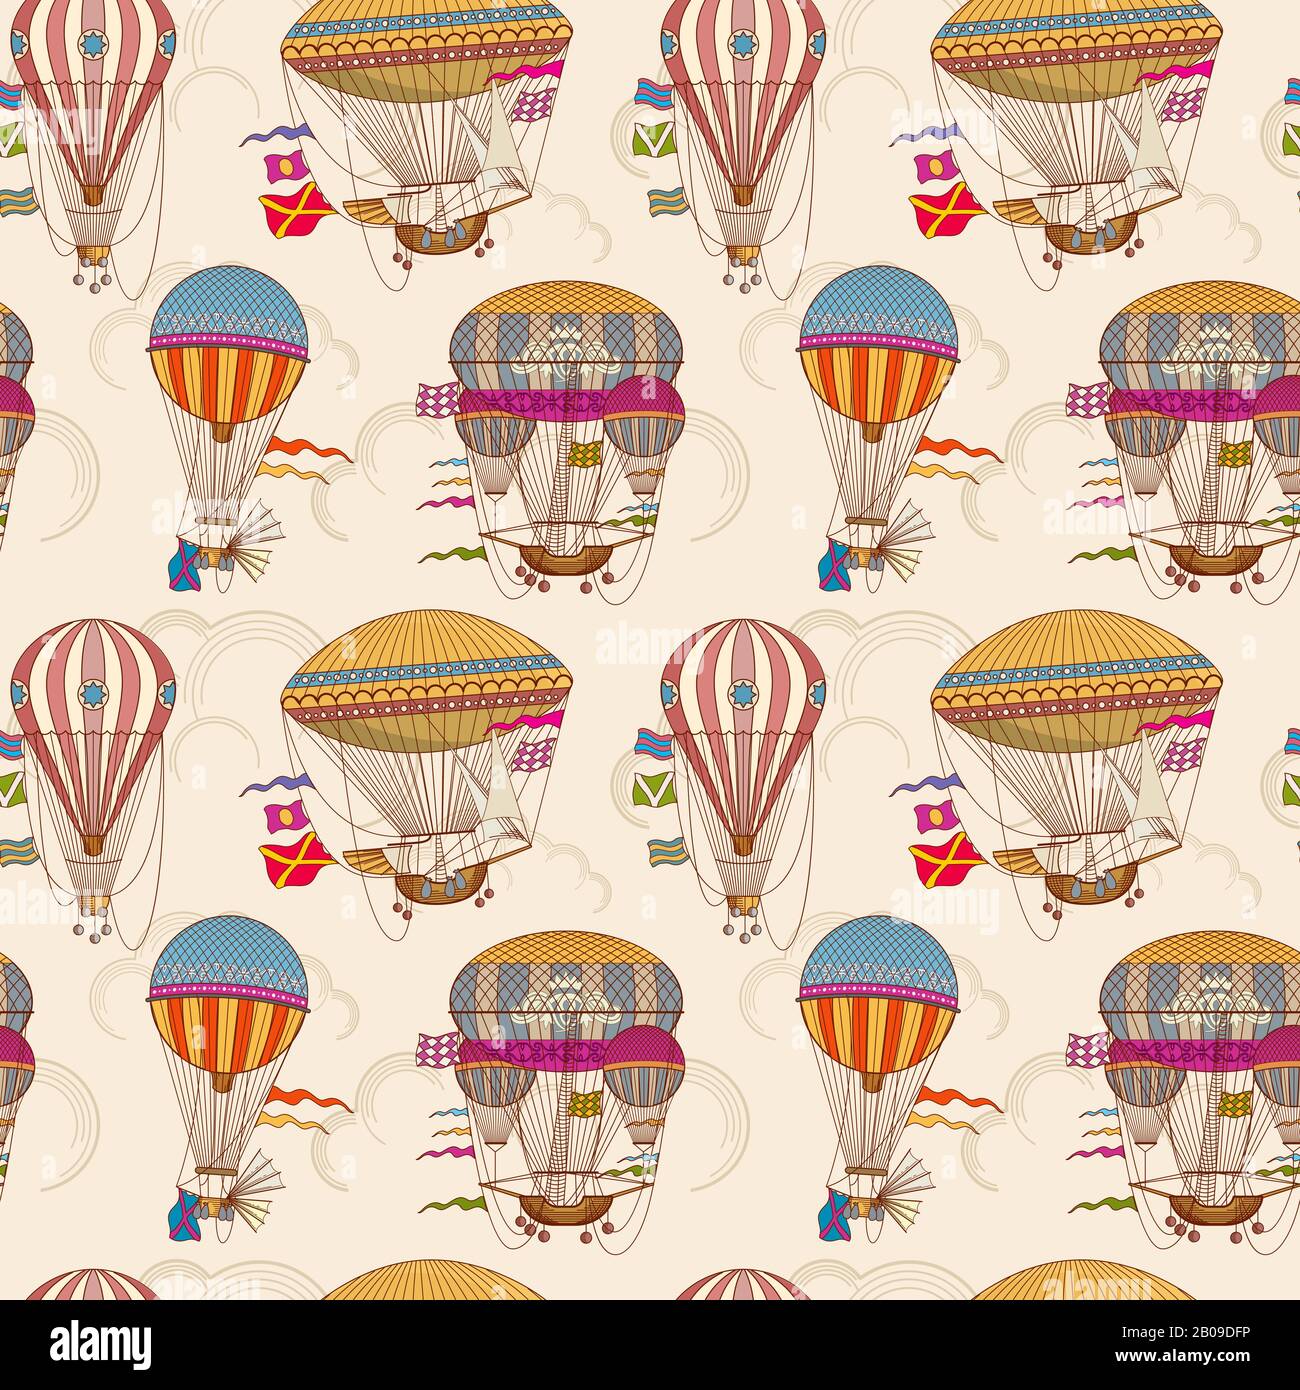 Retro air hot balloons seamless childrens vector background. Color pattern with striped air hot balloons illustration Stock Vector